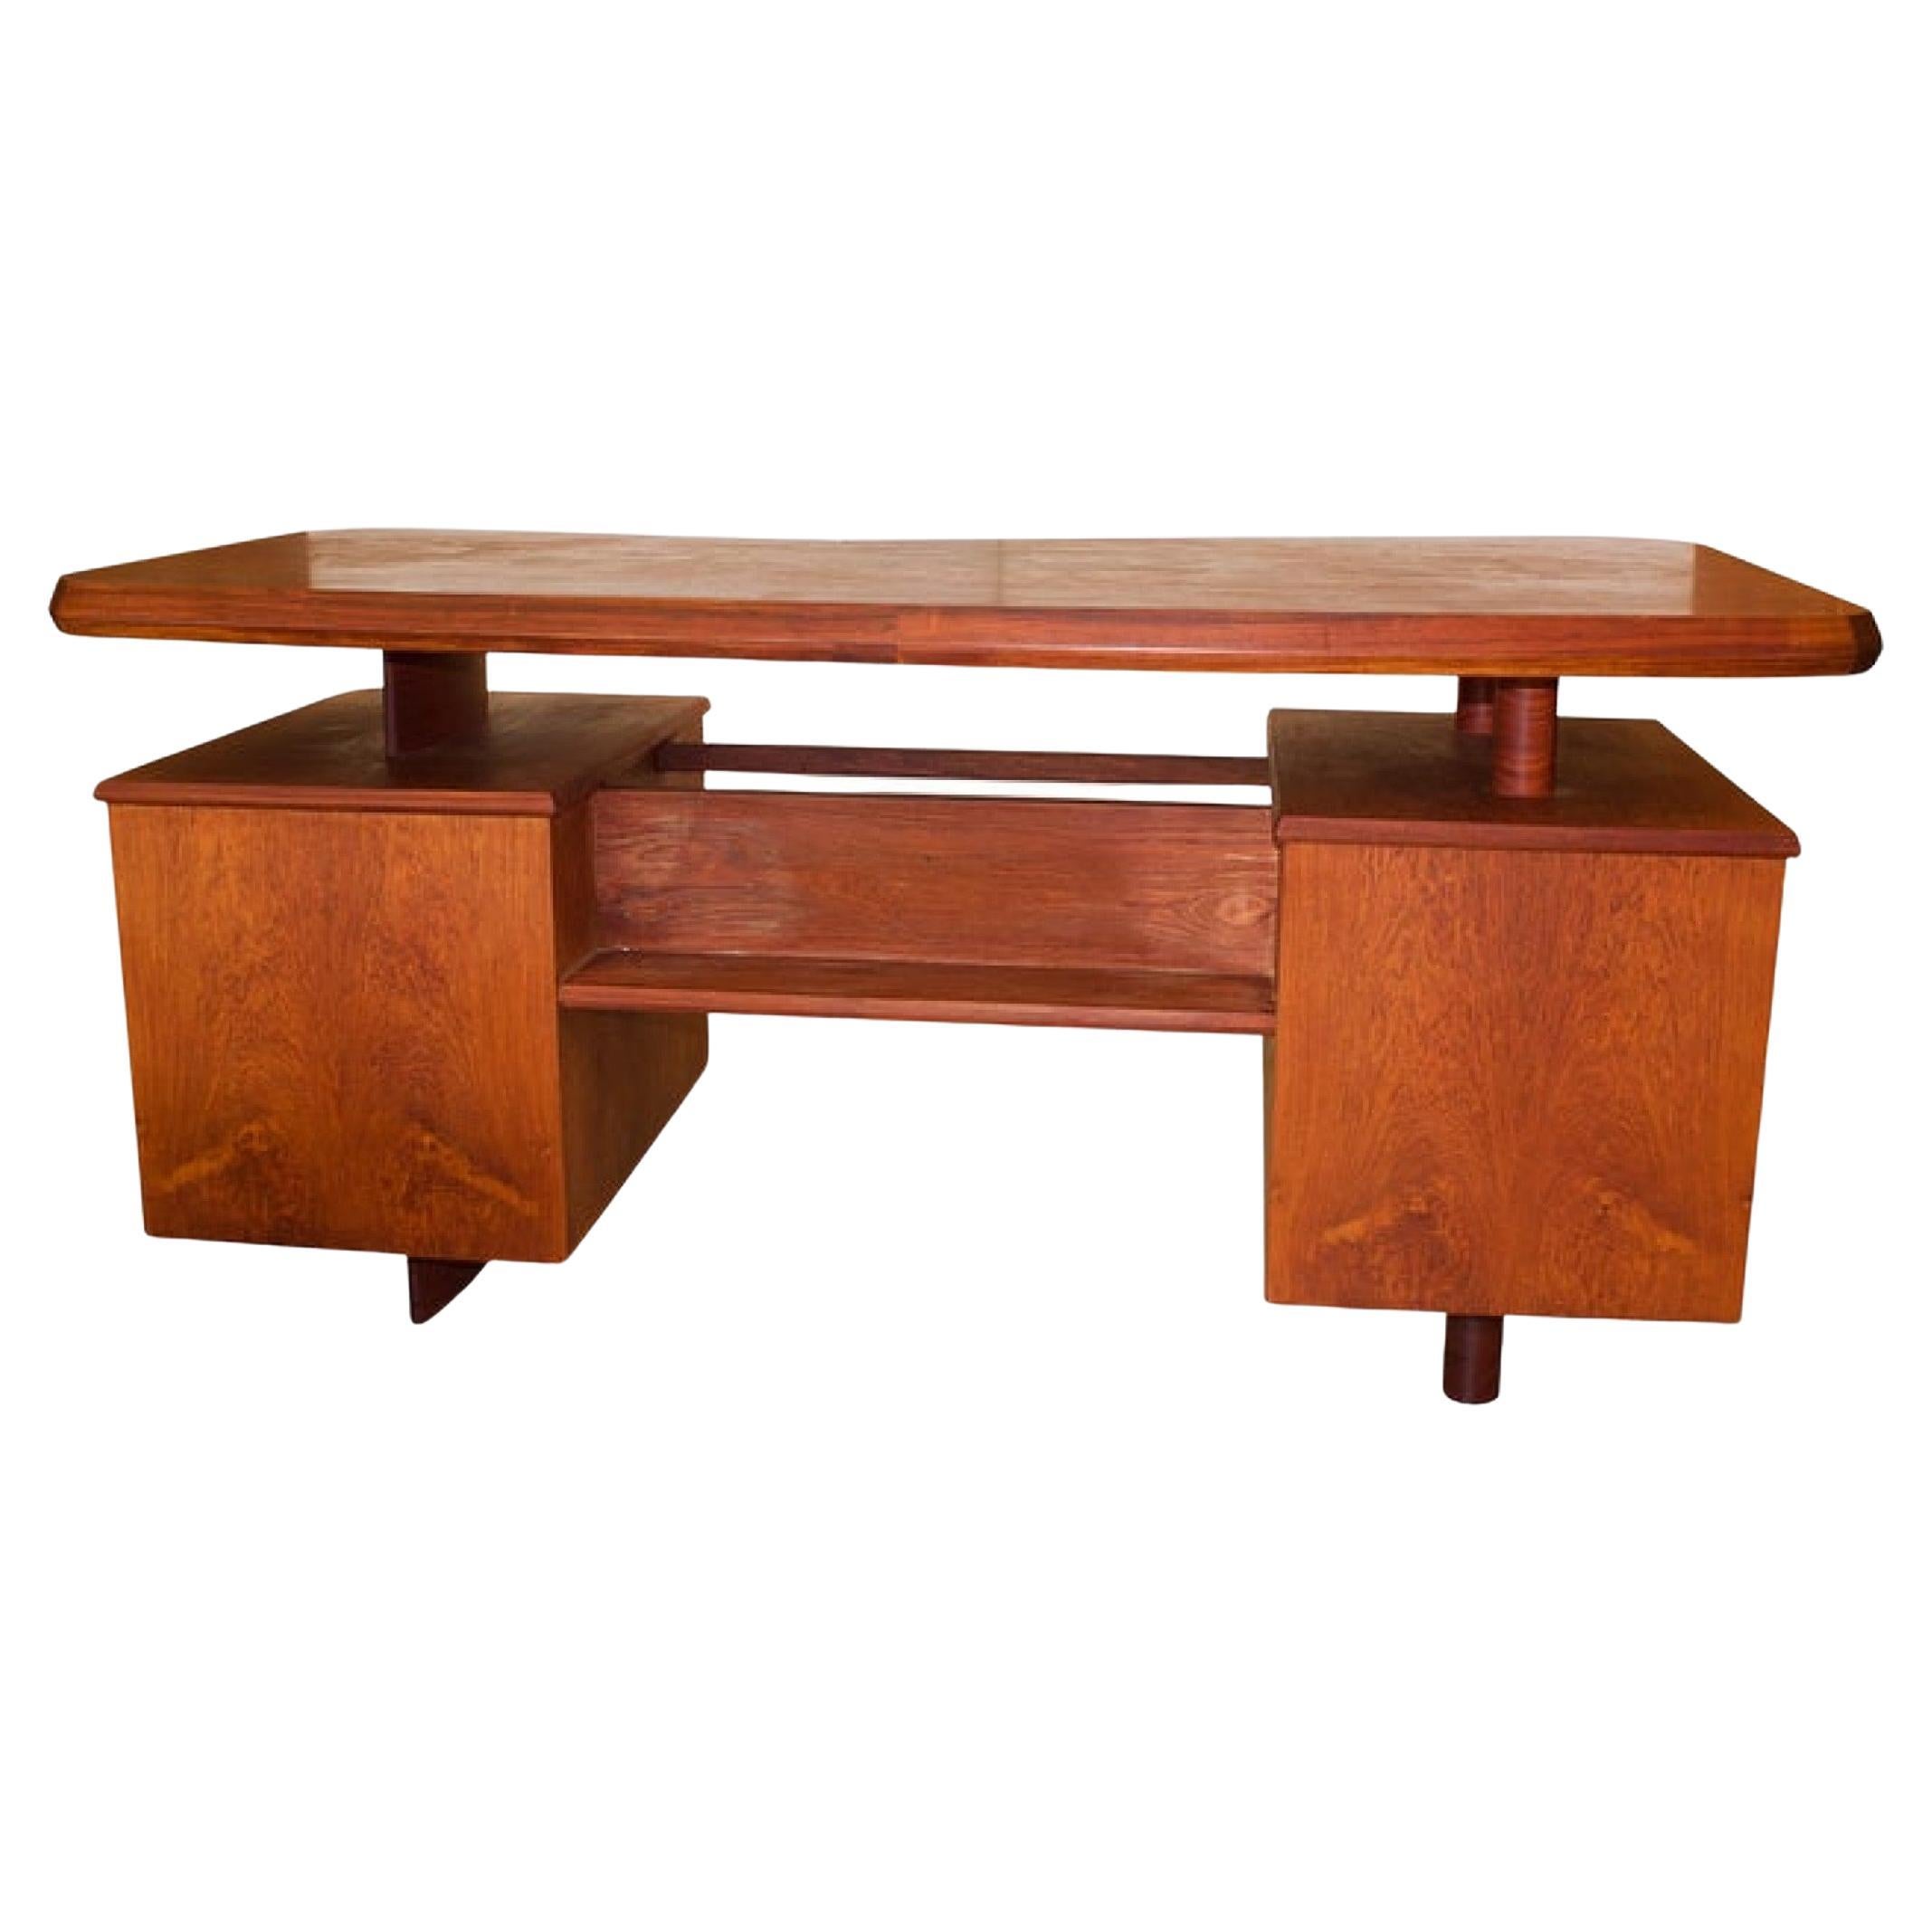 Unique French Modern Solid Rosewood Desk, Pierre Chapo, 1950s For Sale